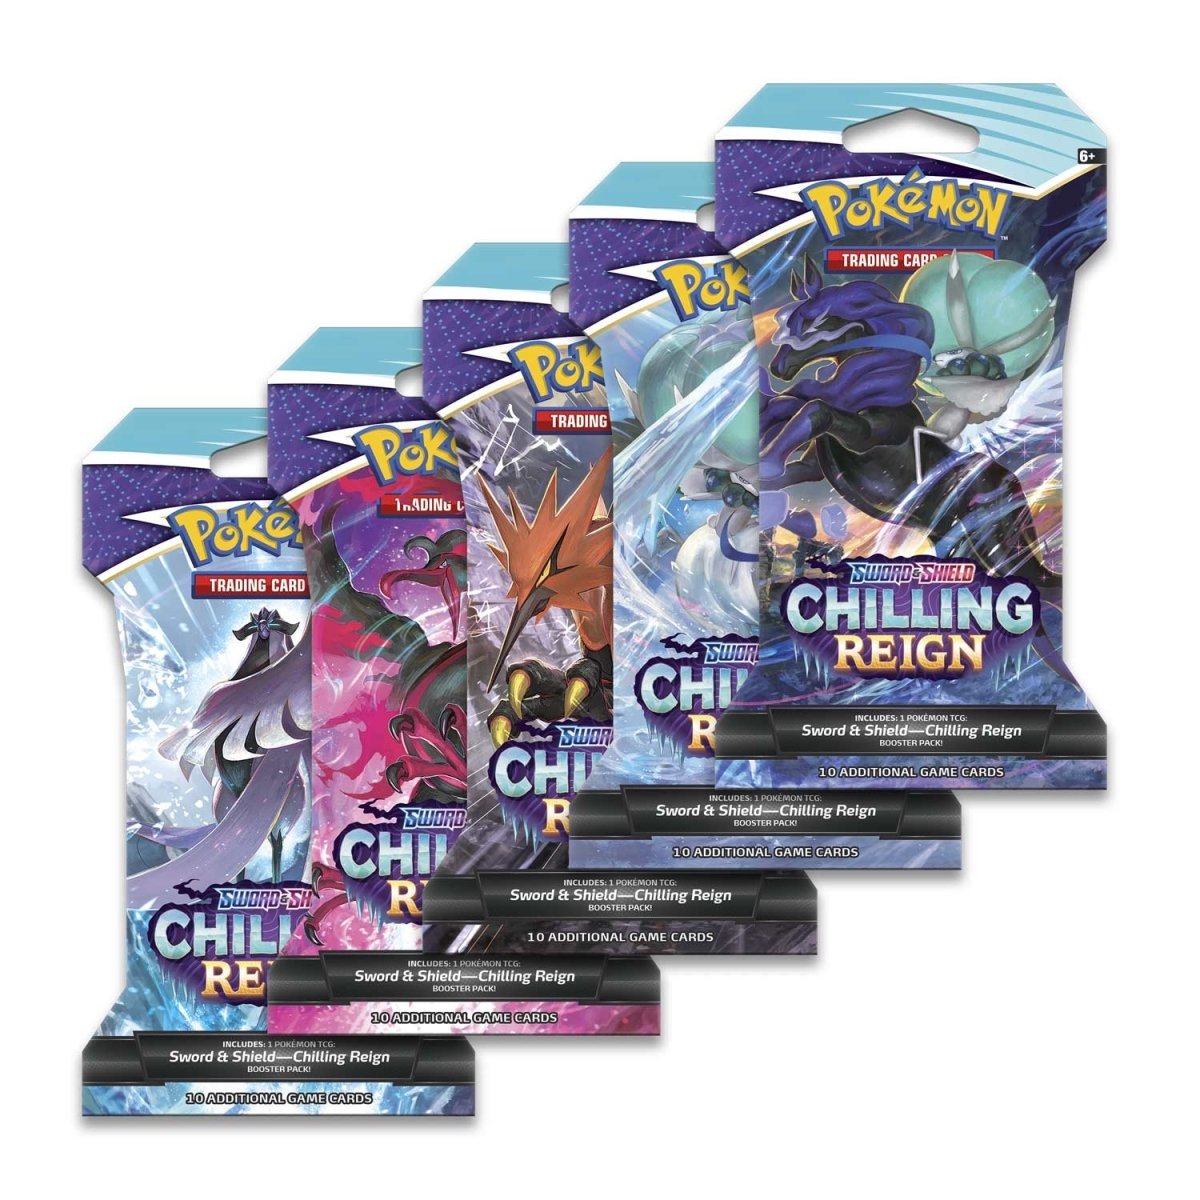 DEPRECATED] Sword & Shield - Chilling Reign Sleeved Booster Pack - Galarian Moltres  V - Pokemon TCG Sealed » PKM Booster Packs - SimplyUnlucky Game Shop